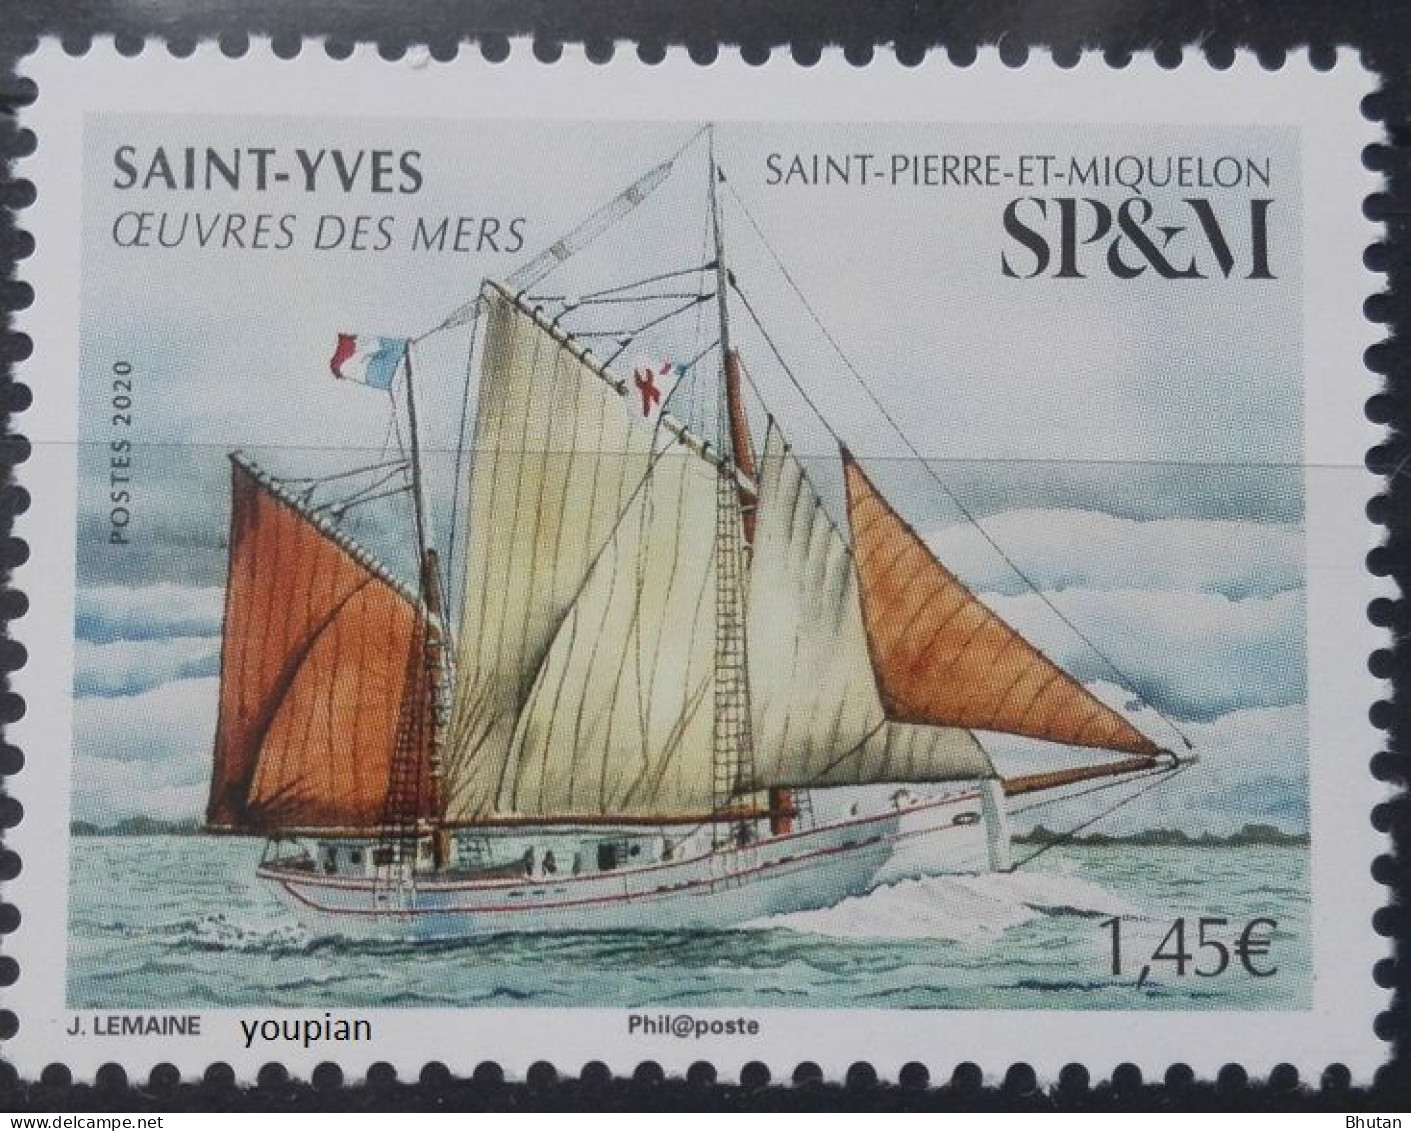 St. Pierre And Miquelon 2020, Saint Yves Ship, MNH Single Stamp - Unused Stamps